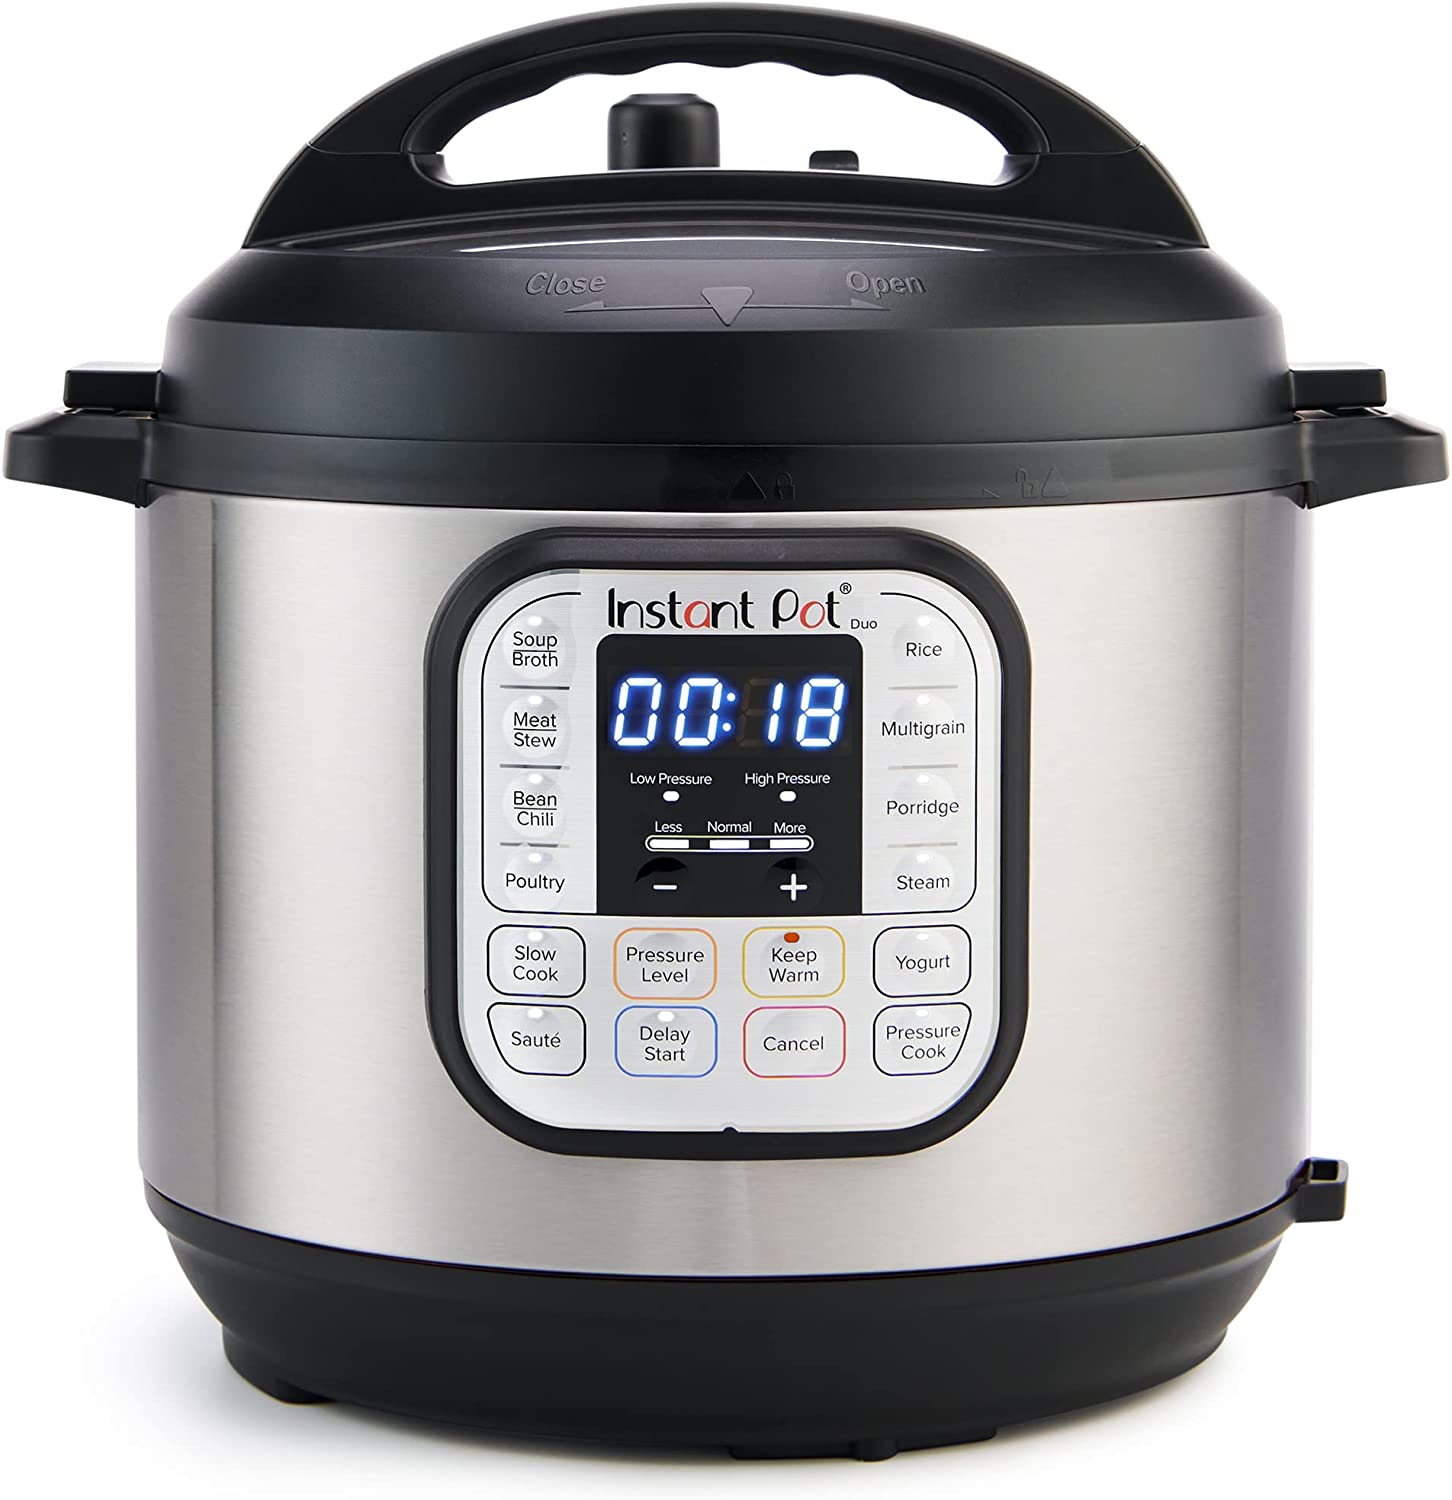 Instant Pot Duo 7-in-1 Electric Pressure Cooker, Slow Cooker, Rice Cooker, Steamer, Sauté, Yogurt Maker, Warmer & Sterilizer, Includes Free App with over 1900 Recipes, Stainless Steel, 3 Quart - image 1 of 9